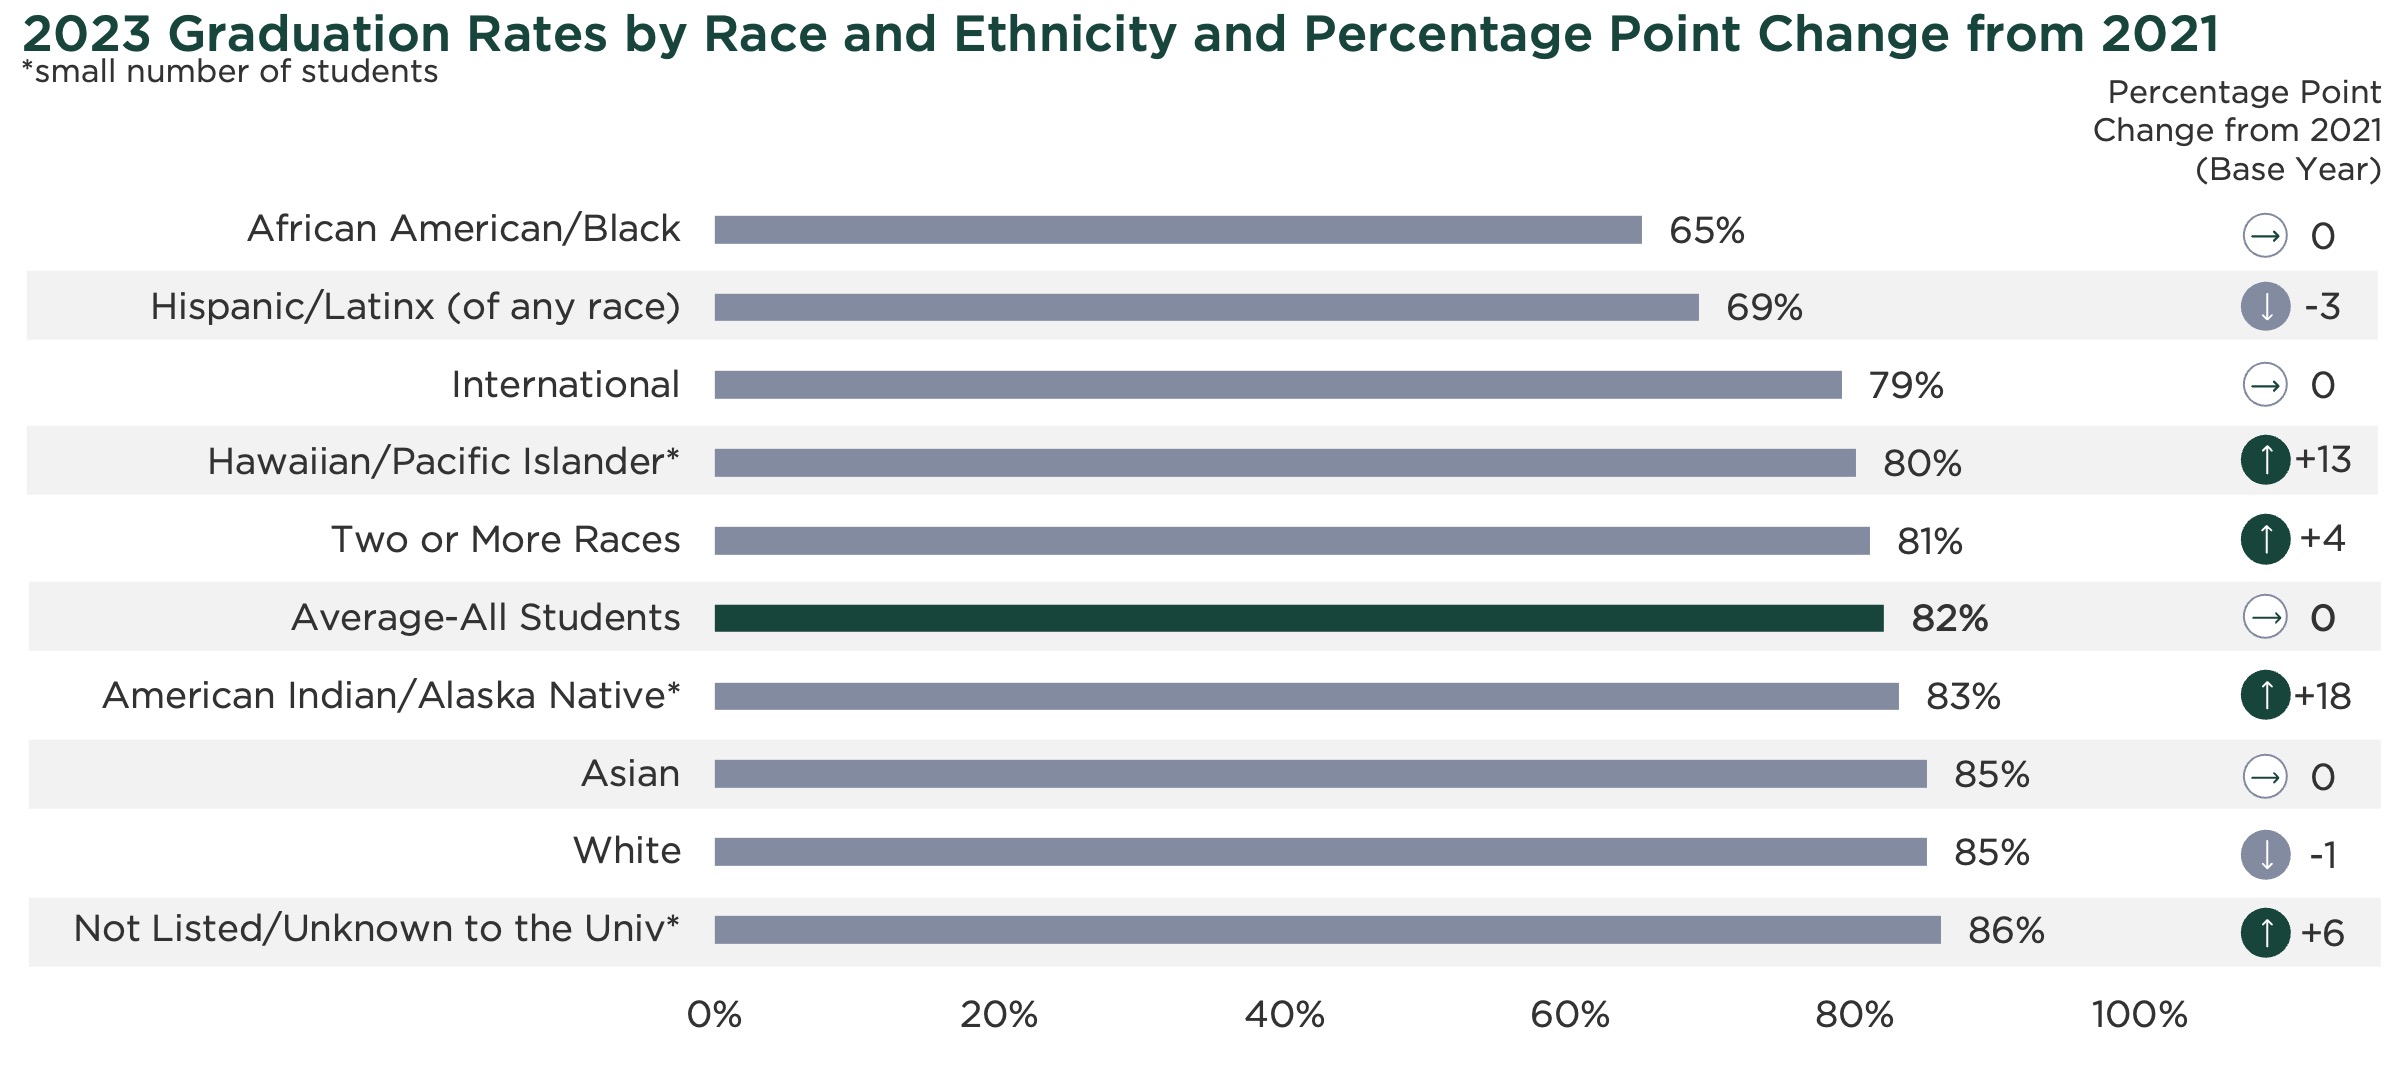 graph for graduation rates by race and ethnicity and percentage point change from 2021